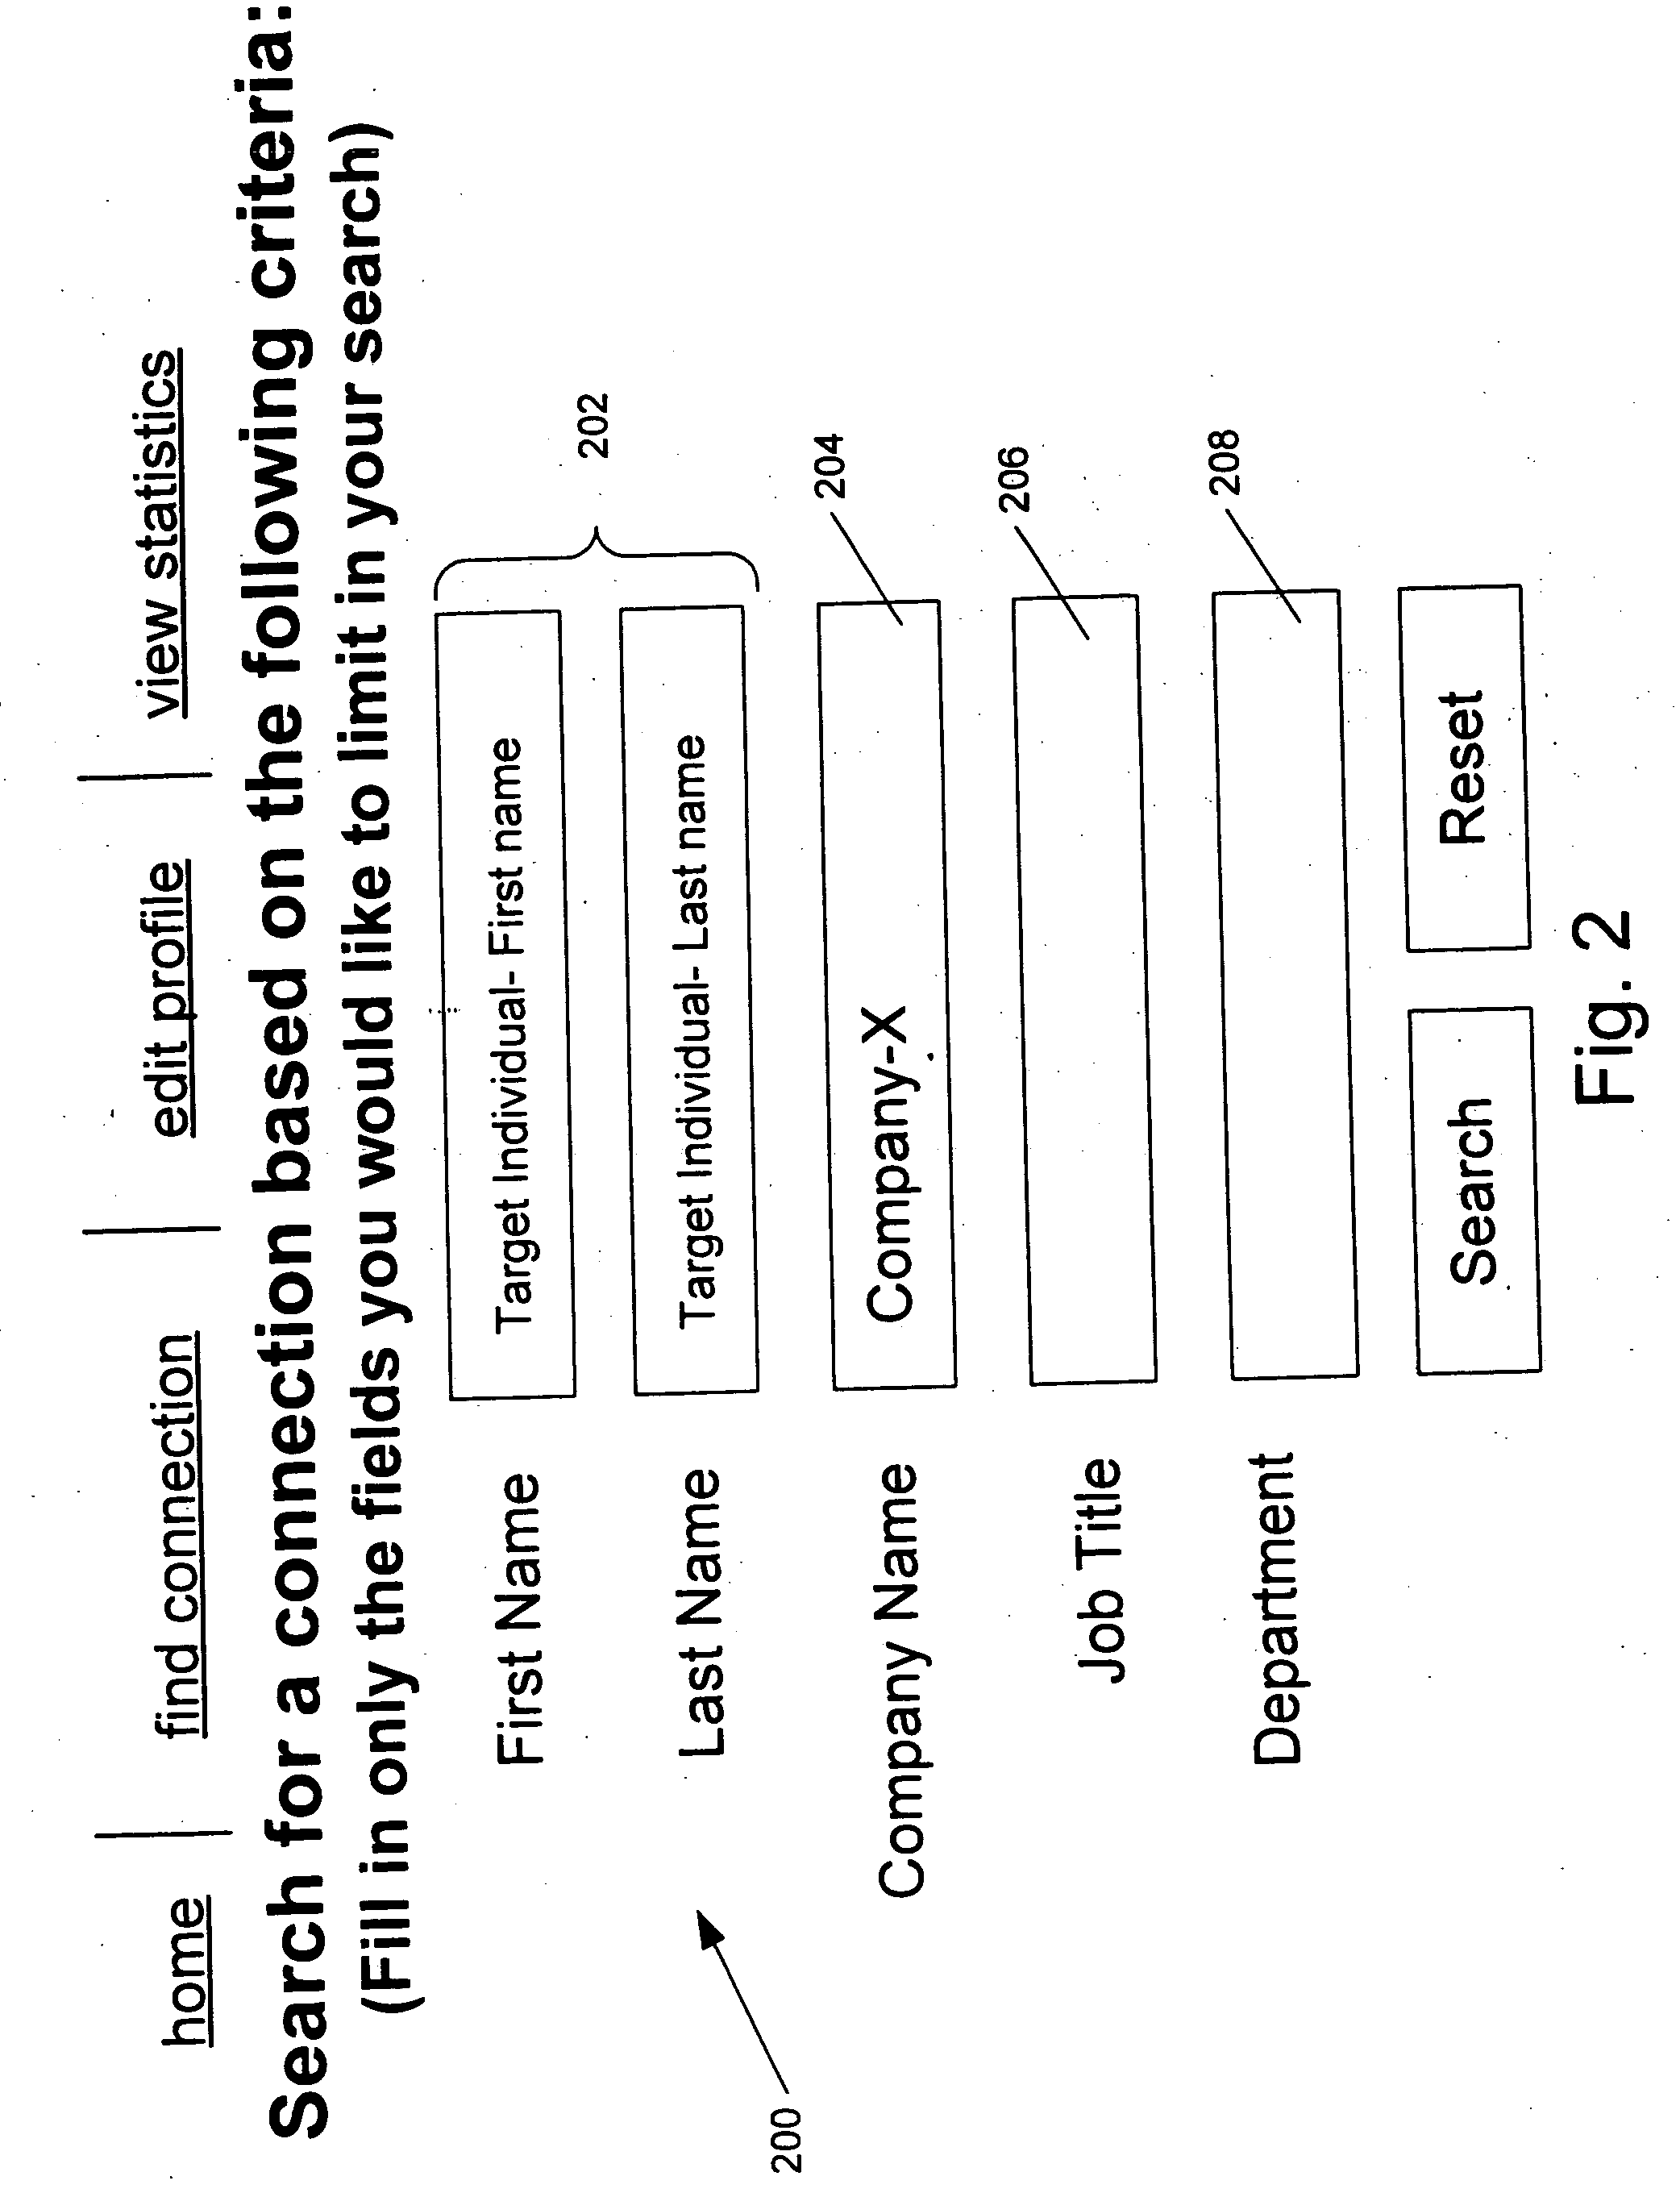 System and method for mapping relationship management intelligence